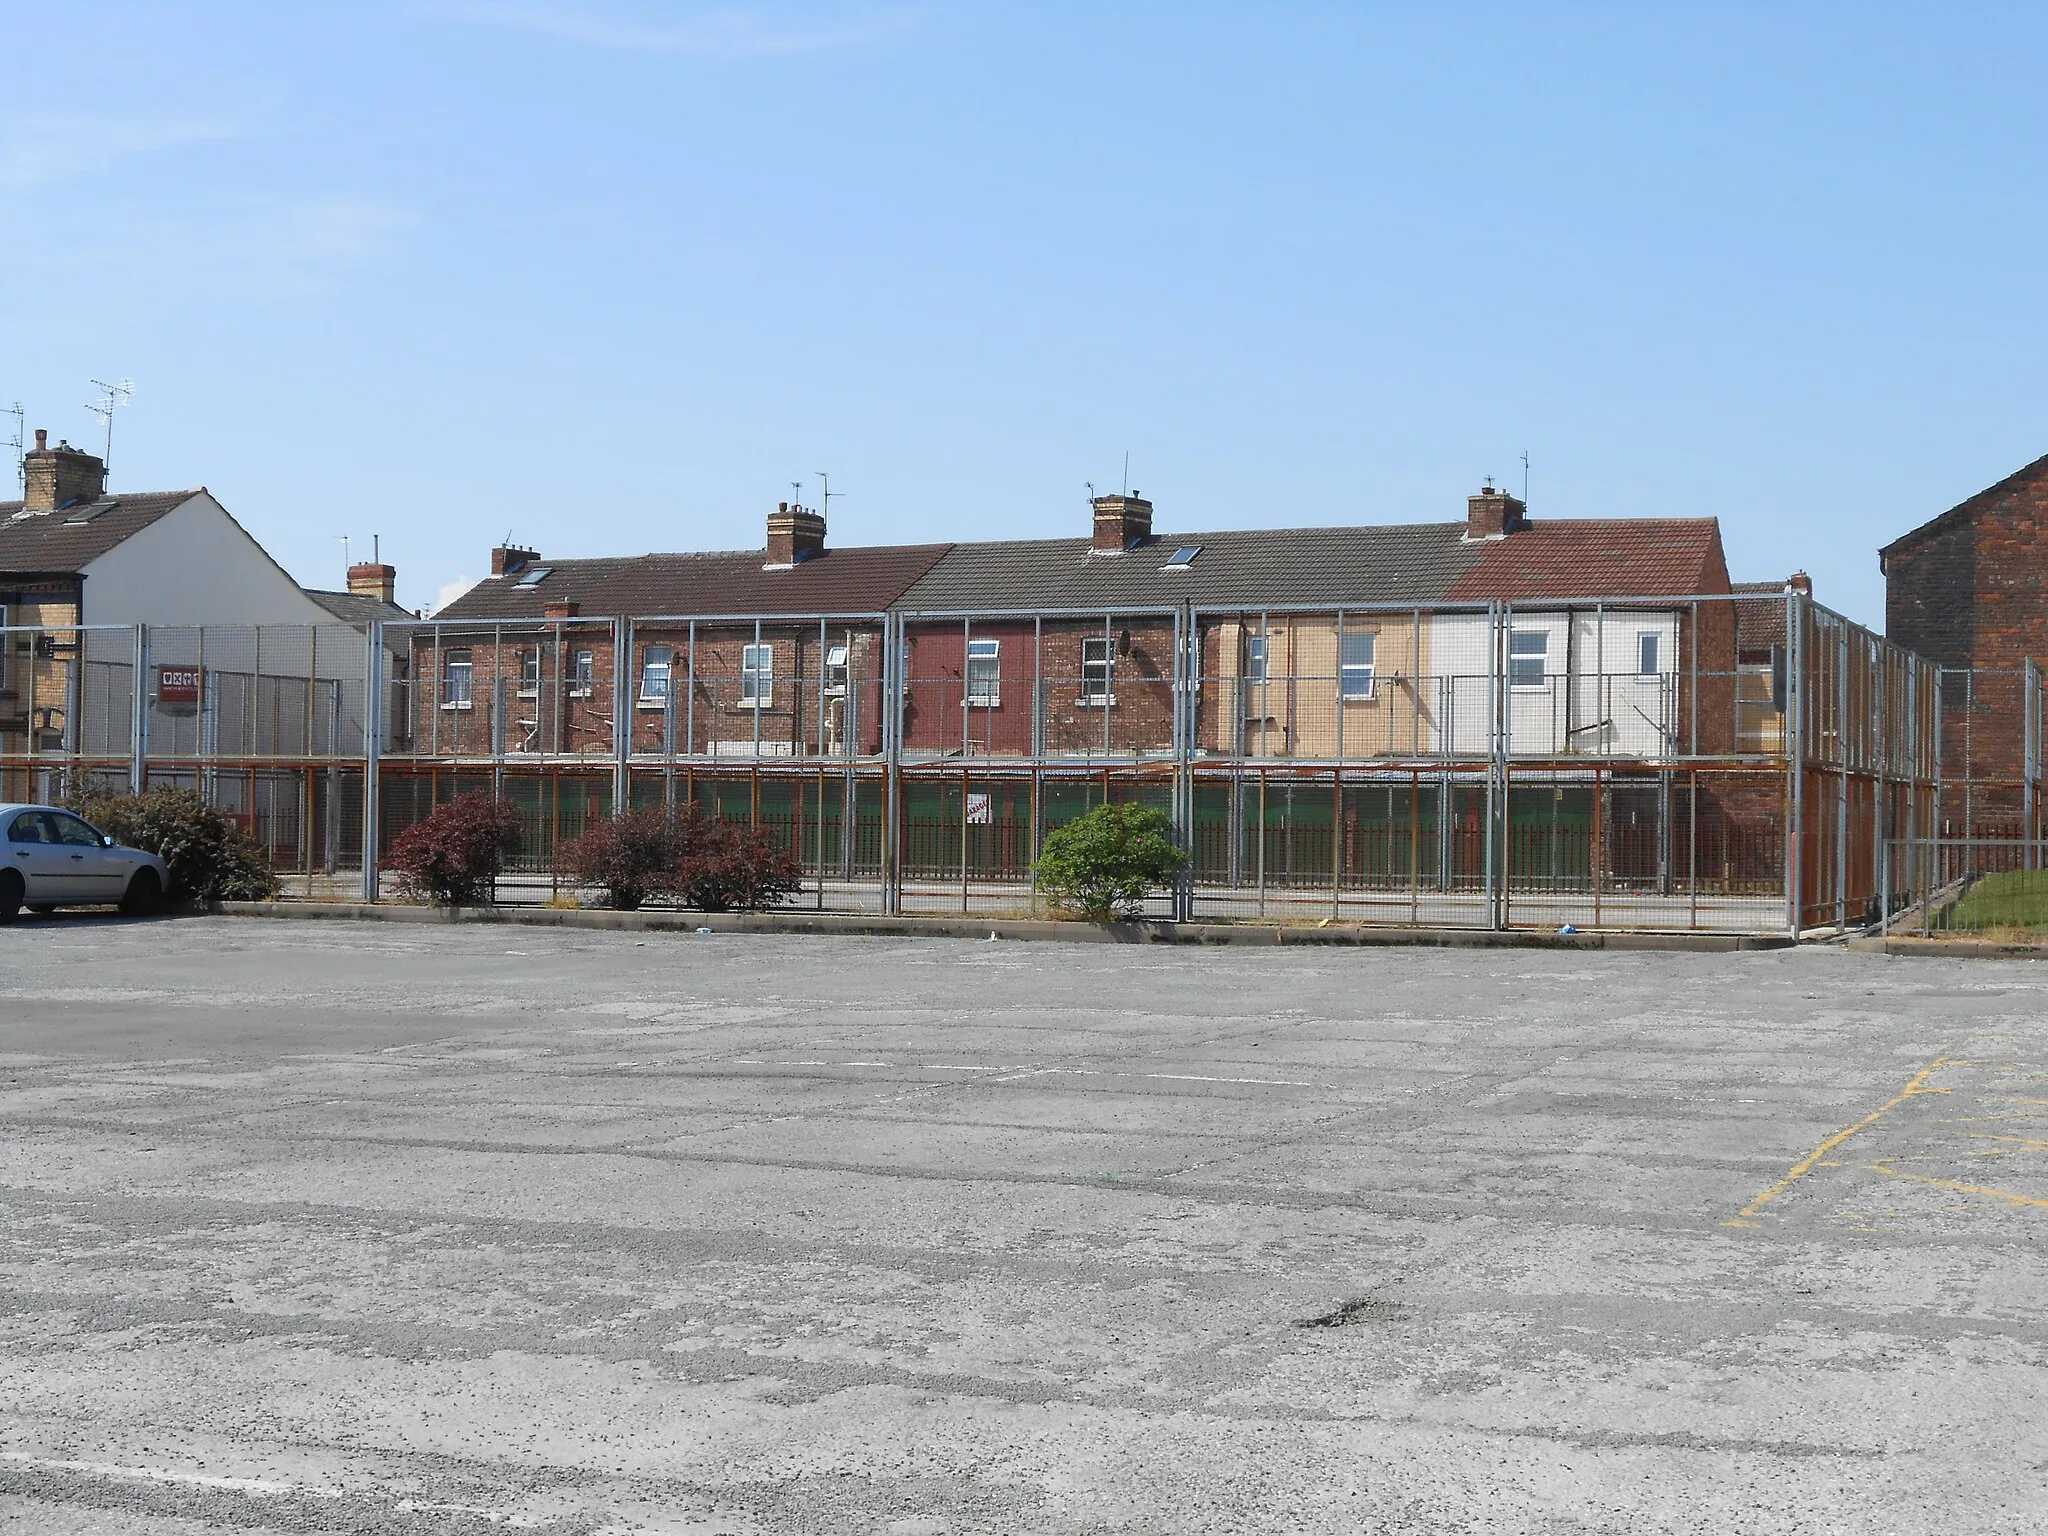 Photo showing: Car park & basketball court, Rappart Road, Egremont, Wallasey, Wirral, Merseyside, England.